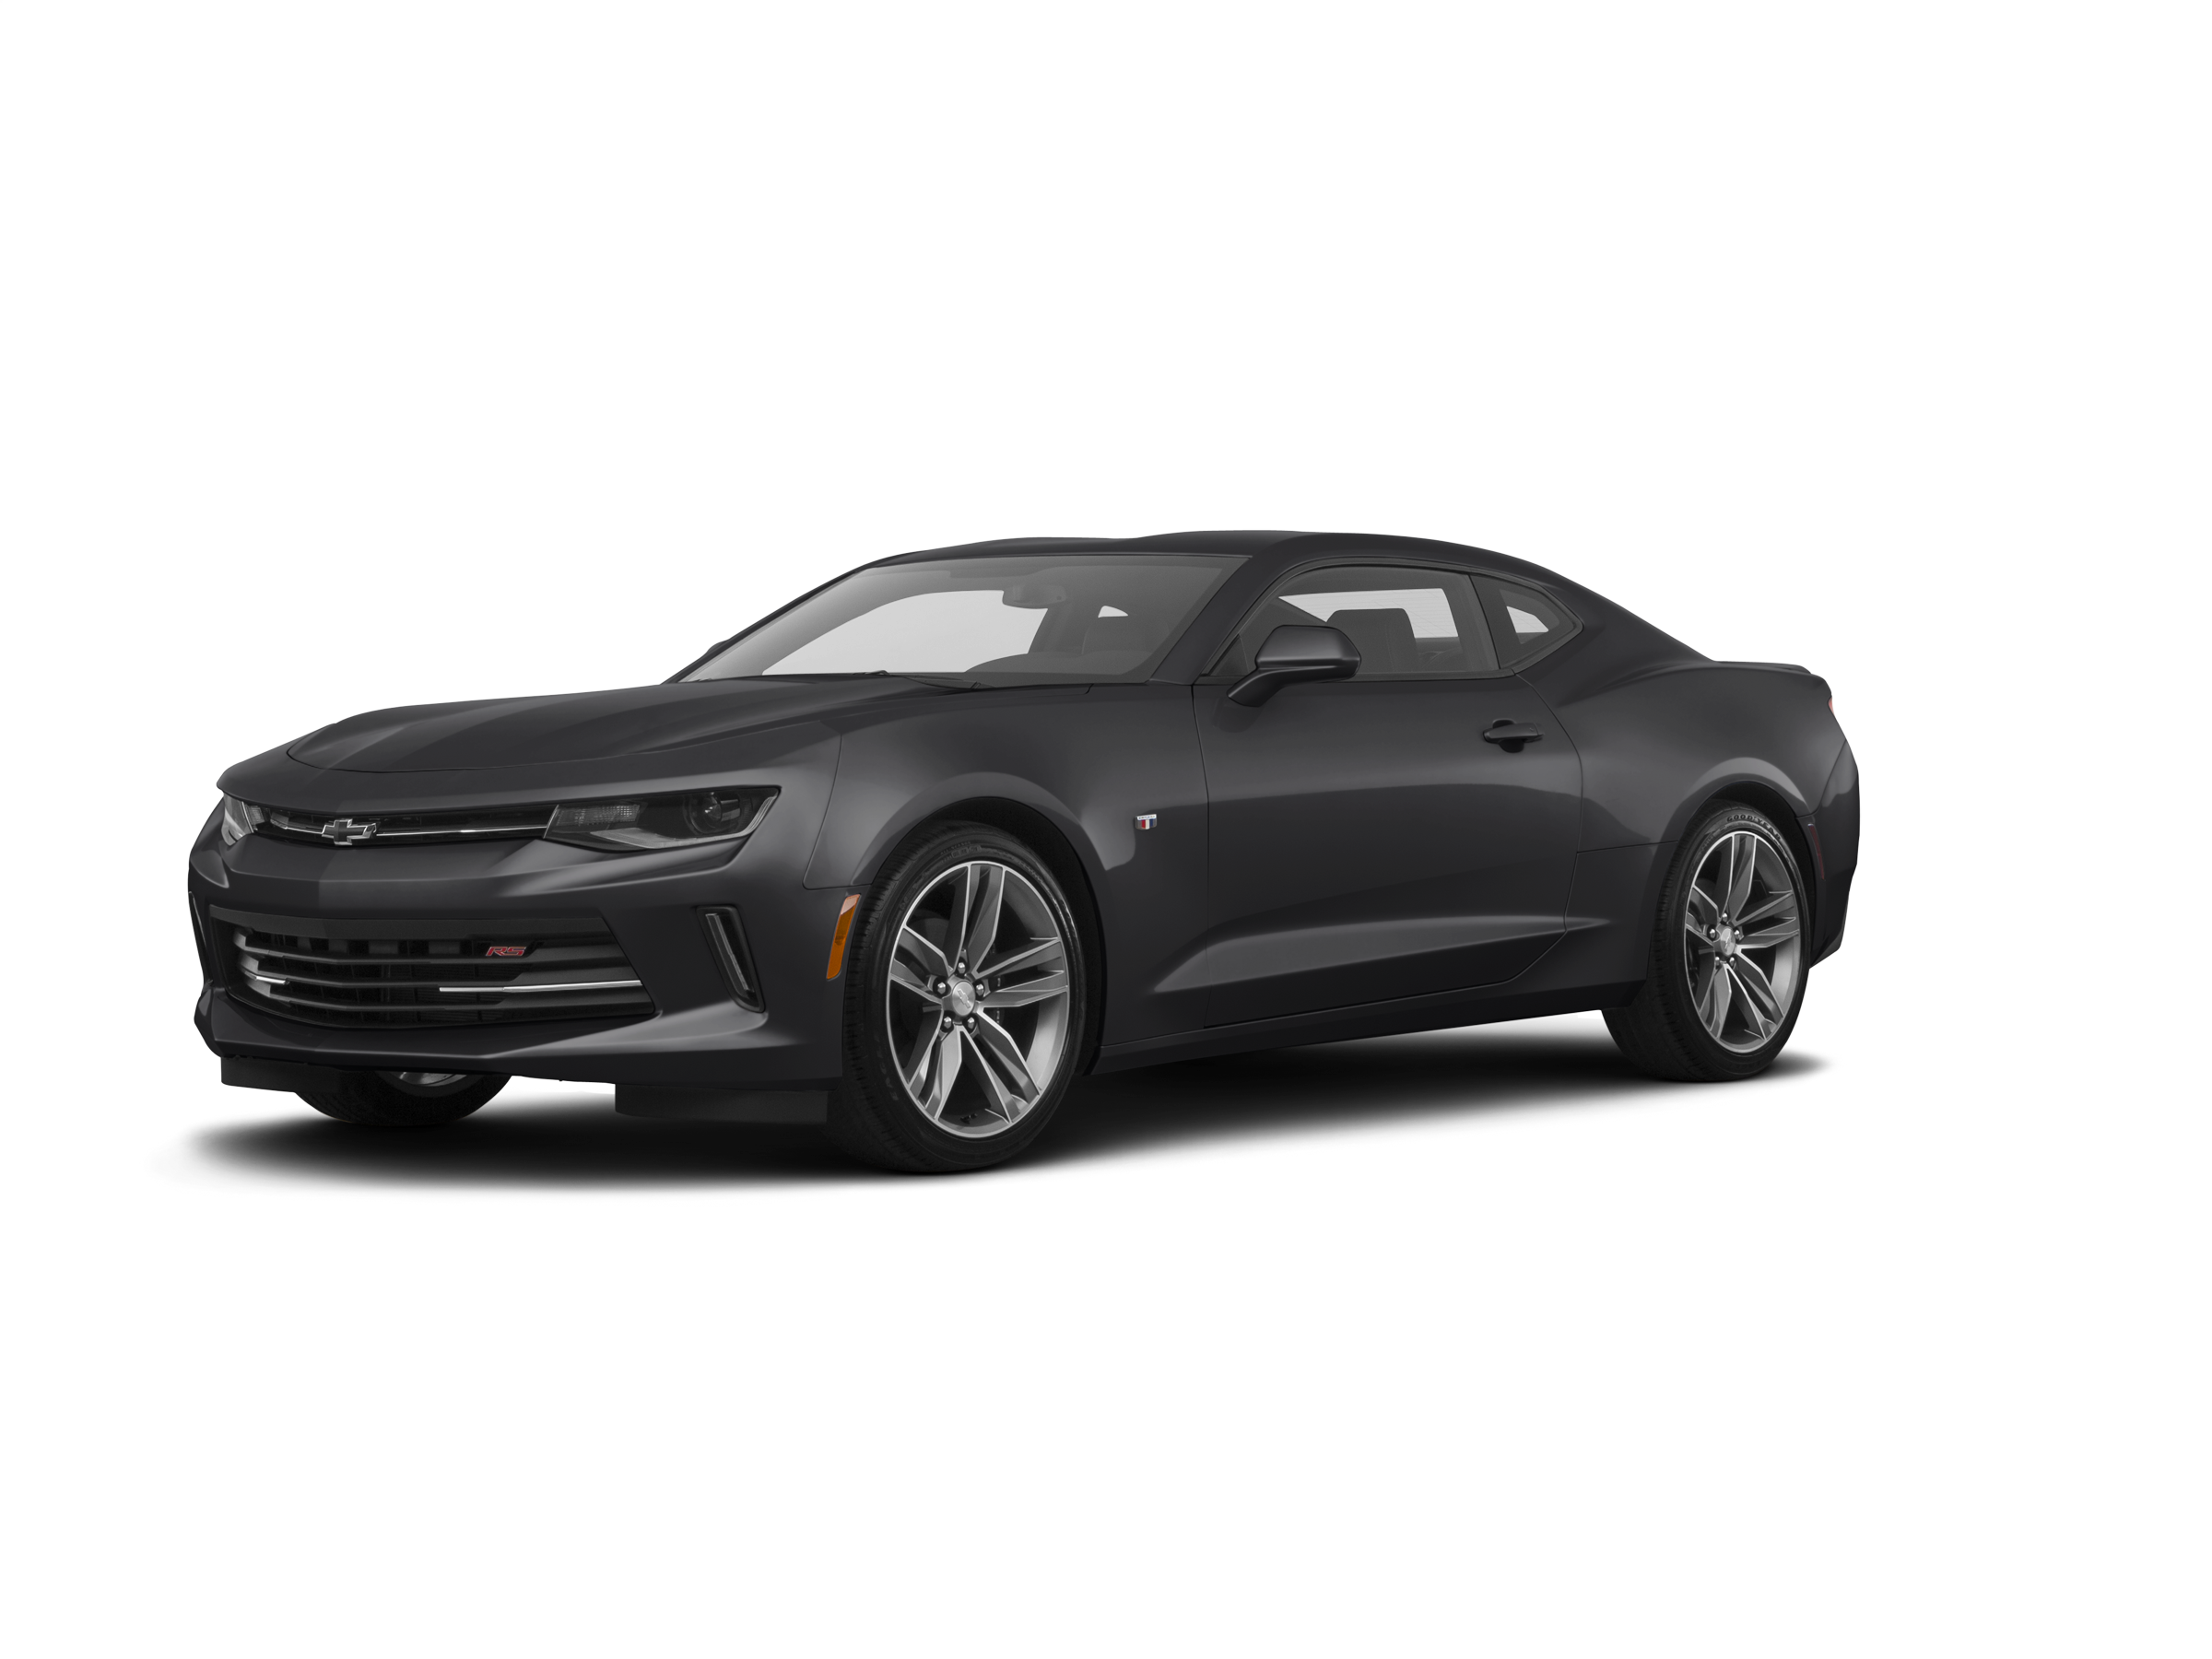 2017 Chevy Camaro Values & Cars for Sale | Kelley Blue Book